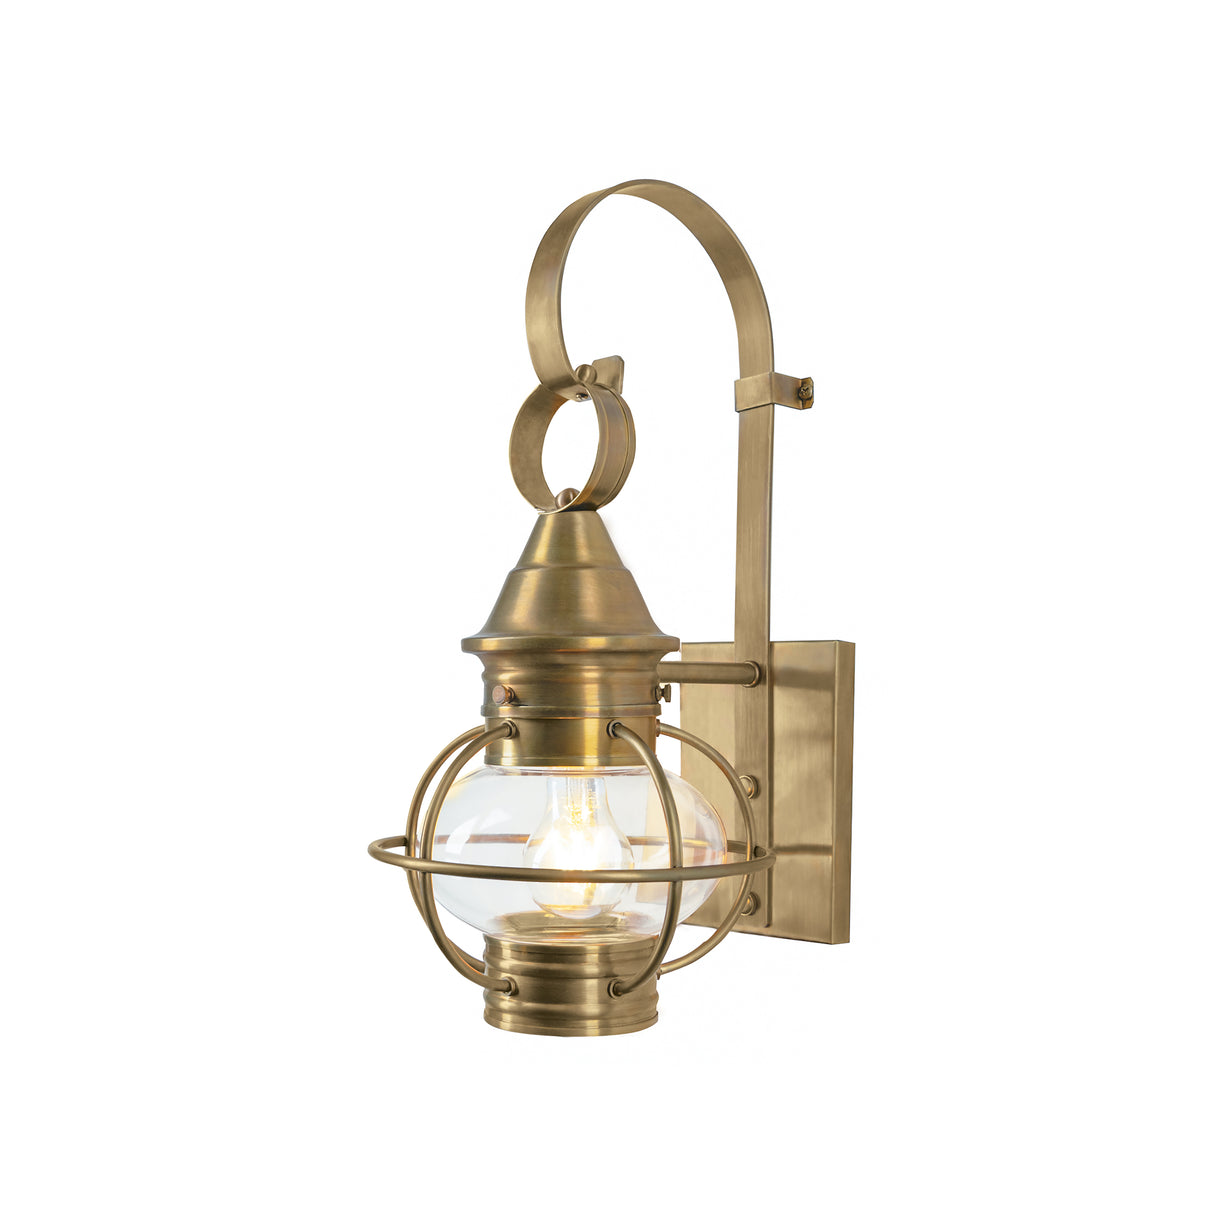 Elk 1713-AG-CL American Onion Outdoor Wall Light - Aged Brass